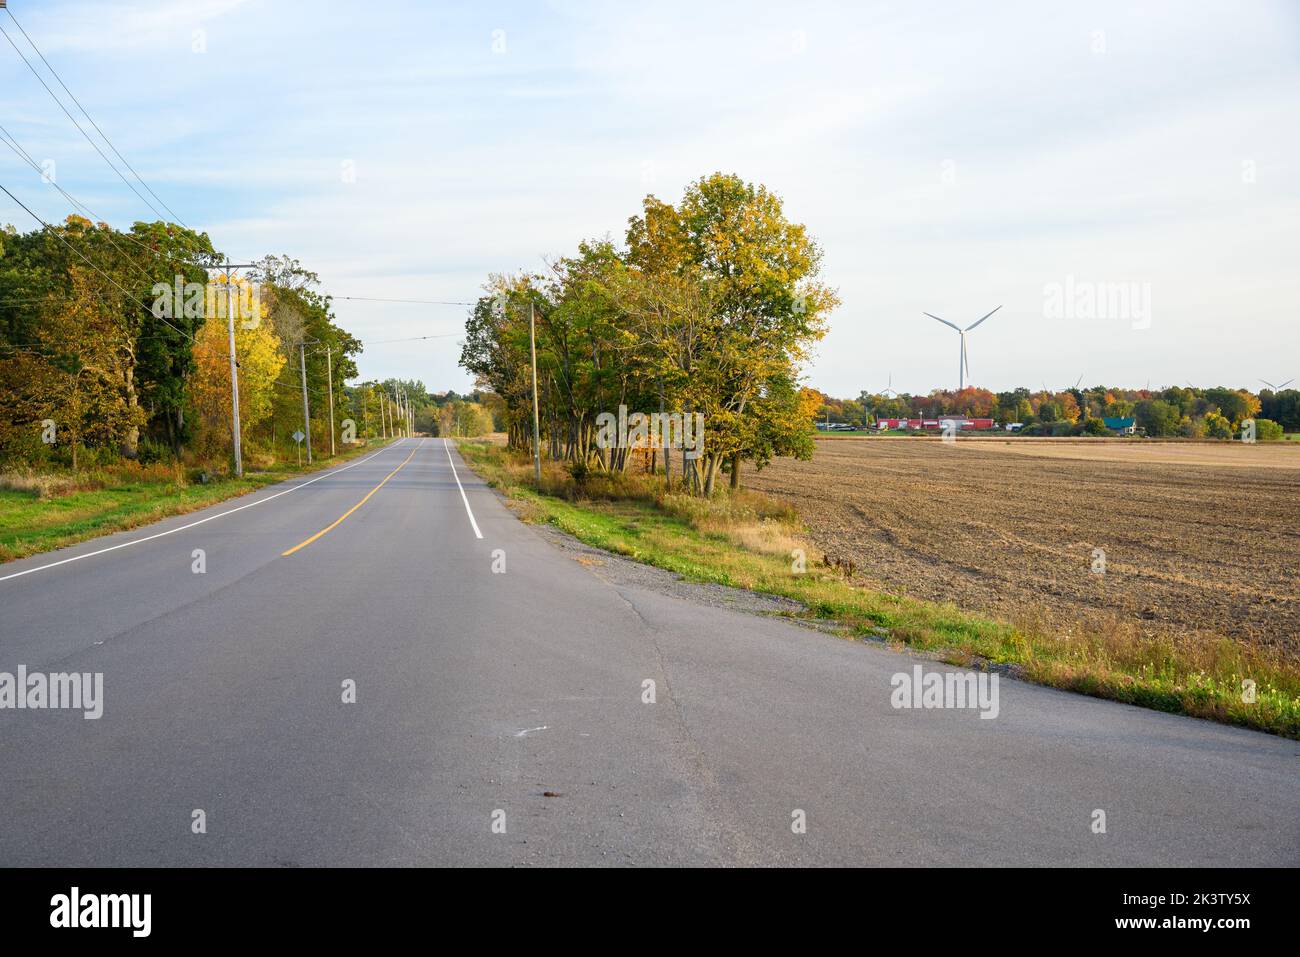 Deseerted tree lined country road on a partly cloudy autumn day. Wind turbines are visible in background. Stock Photo